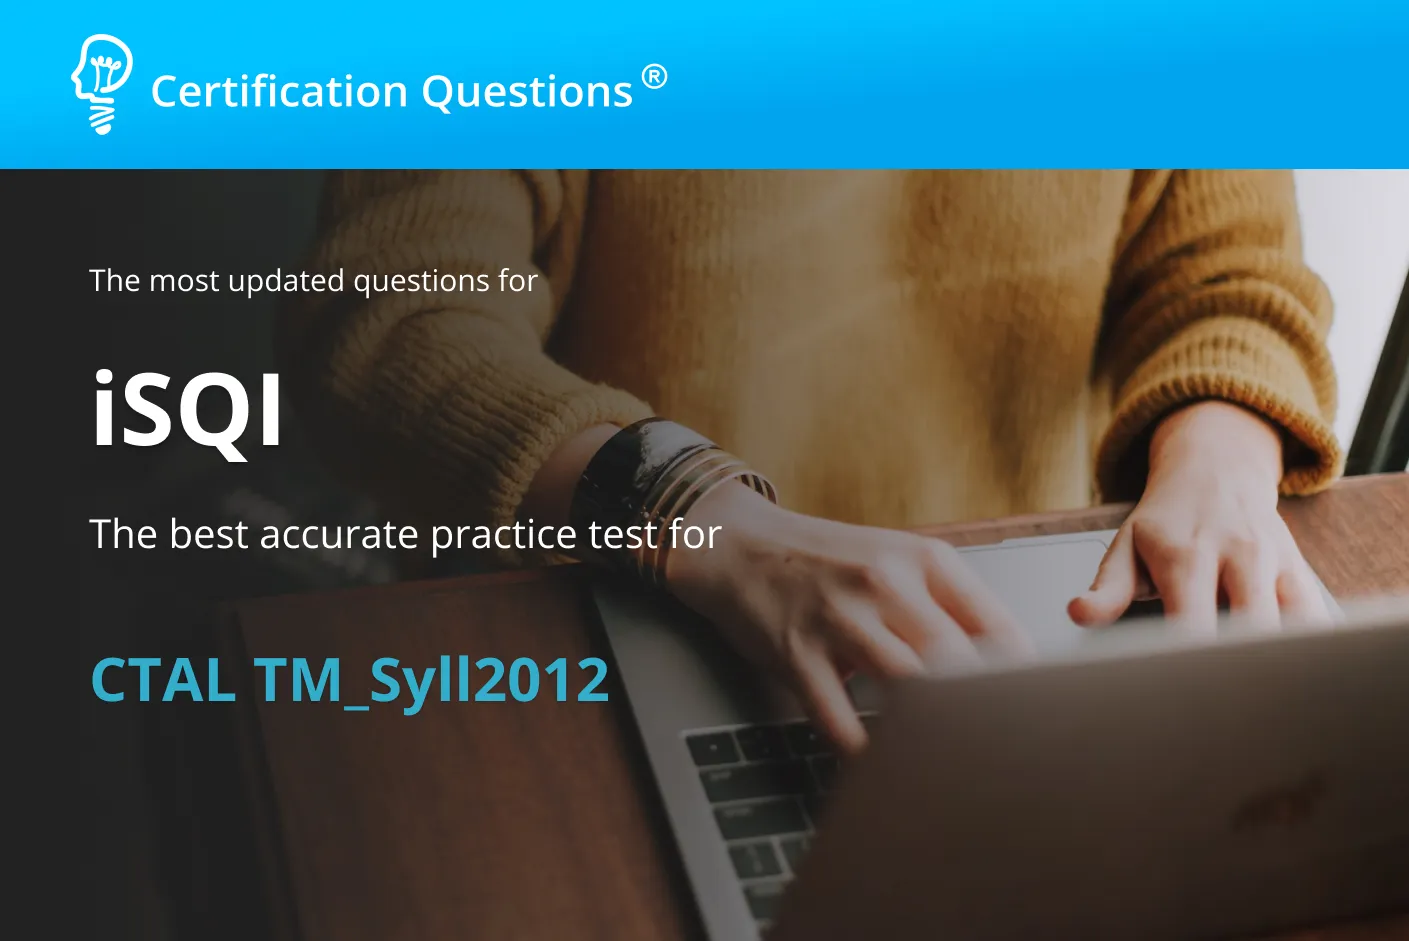 Here is the image for the CTAL TM syll2012 practice test in the USA